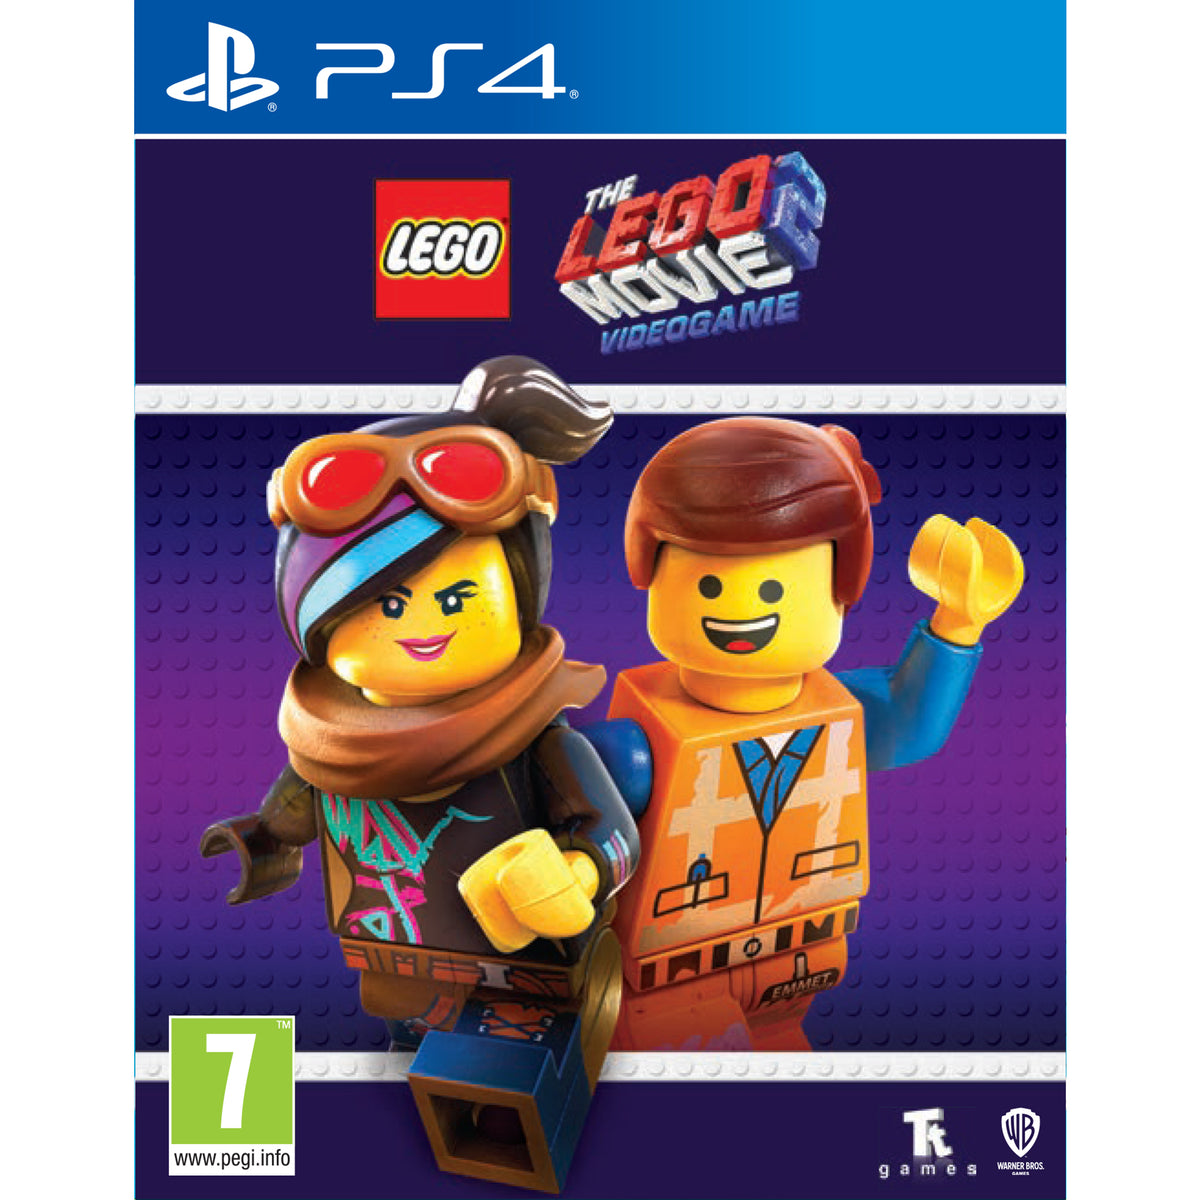 The LEGO Movie 2 Videogame - PS4 – Entertainment Go's Of The